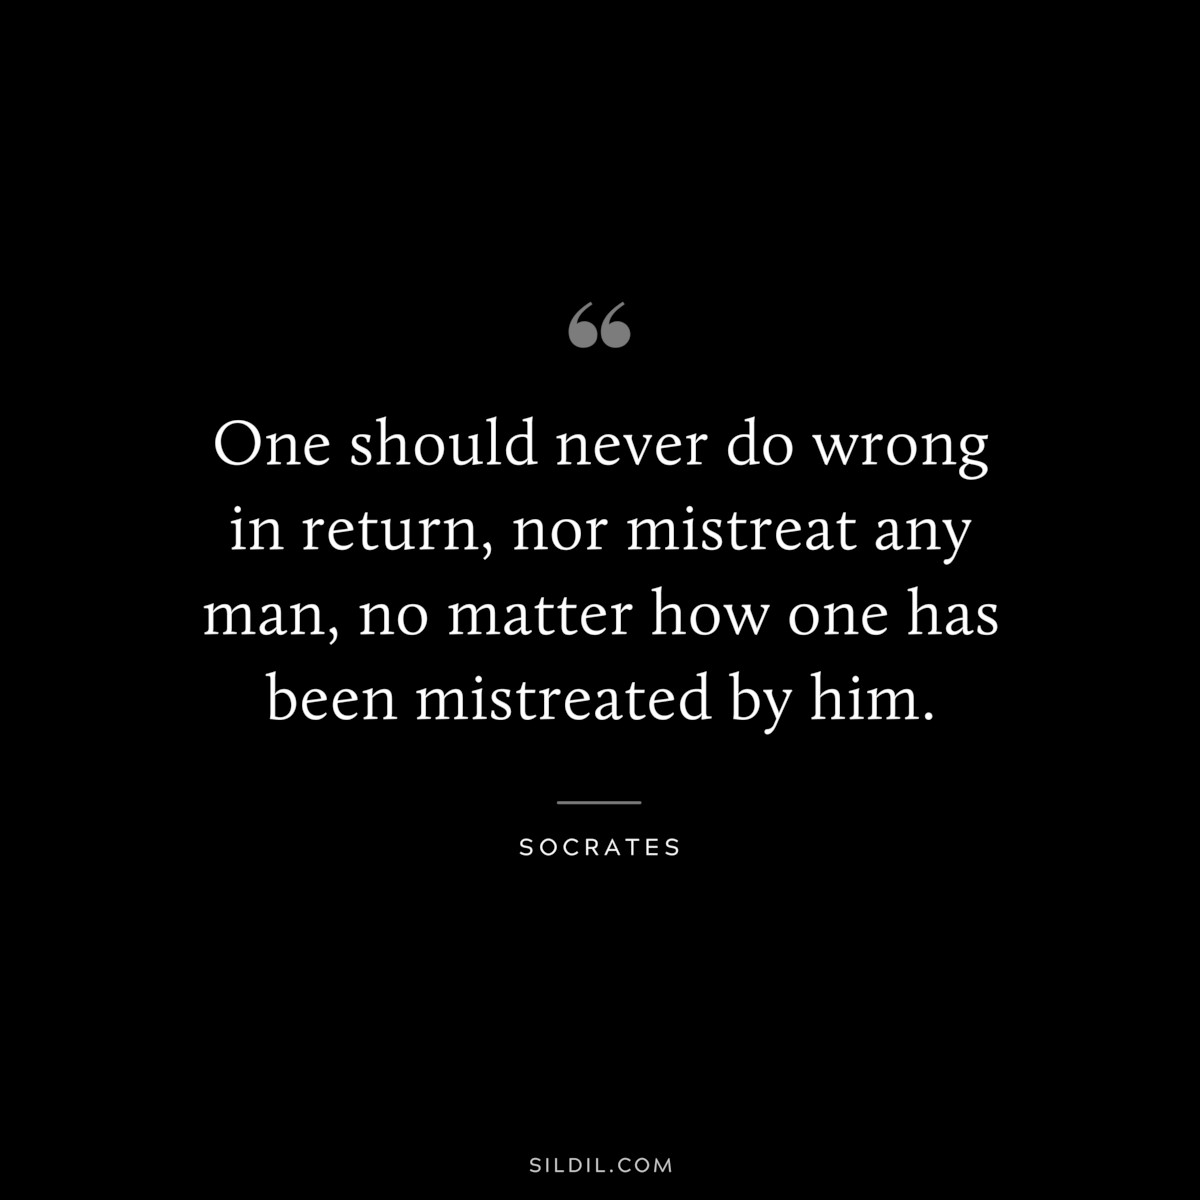 One should never do wrong in return, nor mistreat any man, no matter how one has been mistreated by him. ― Socrates